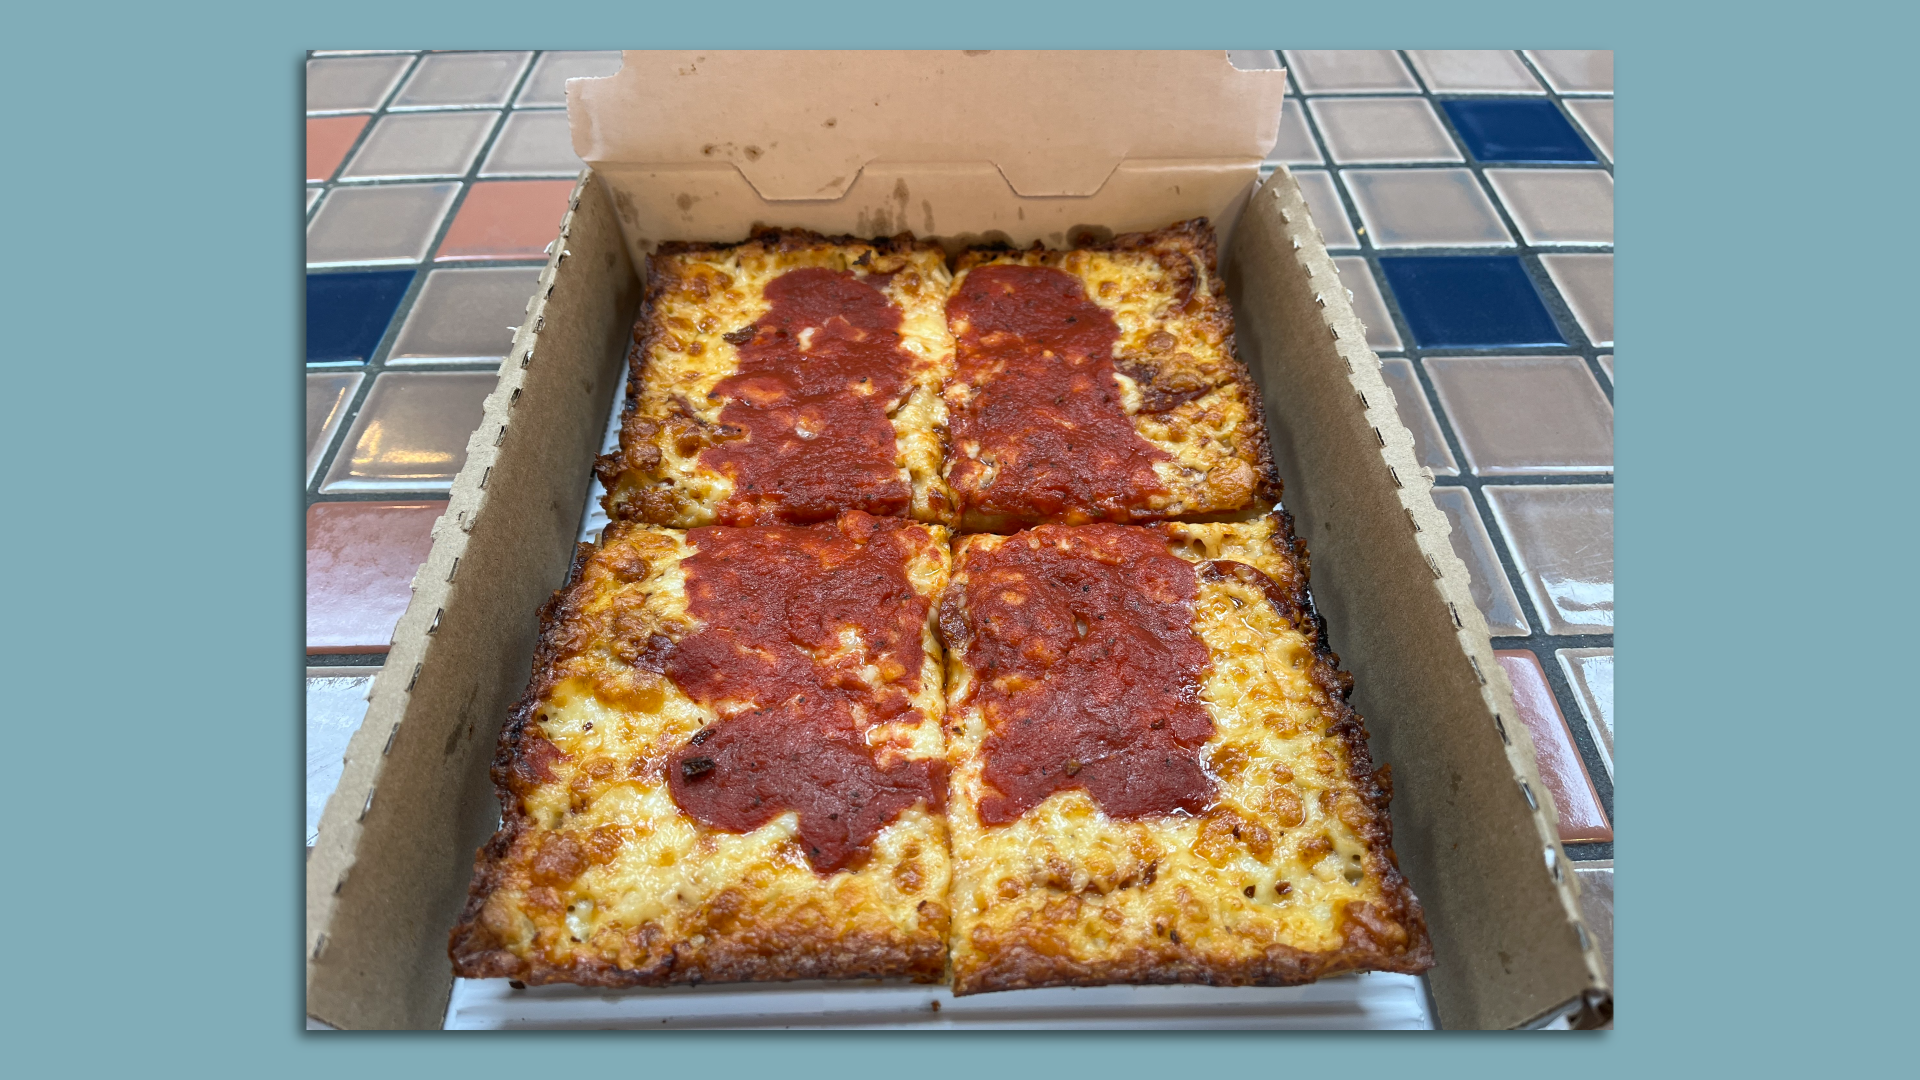 Buddy’s 4-Square pizza with pepperoni.